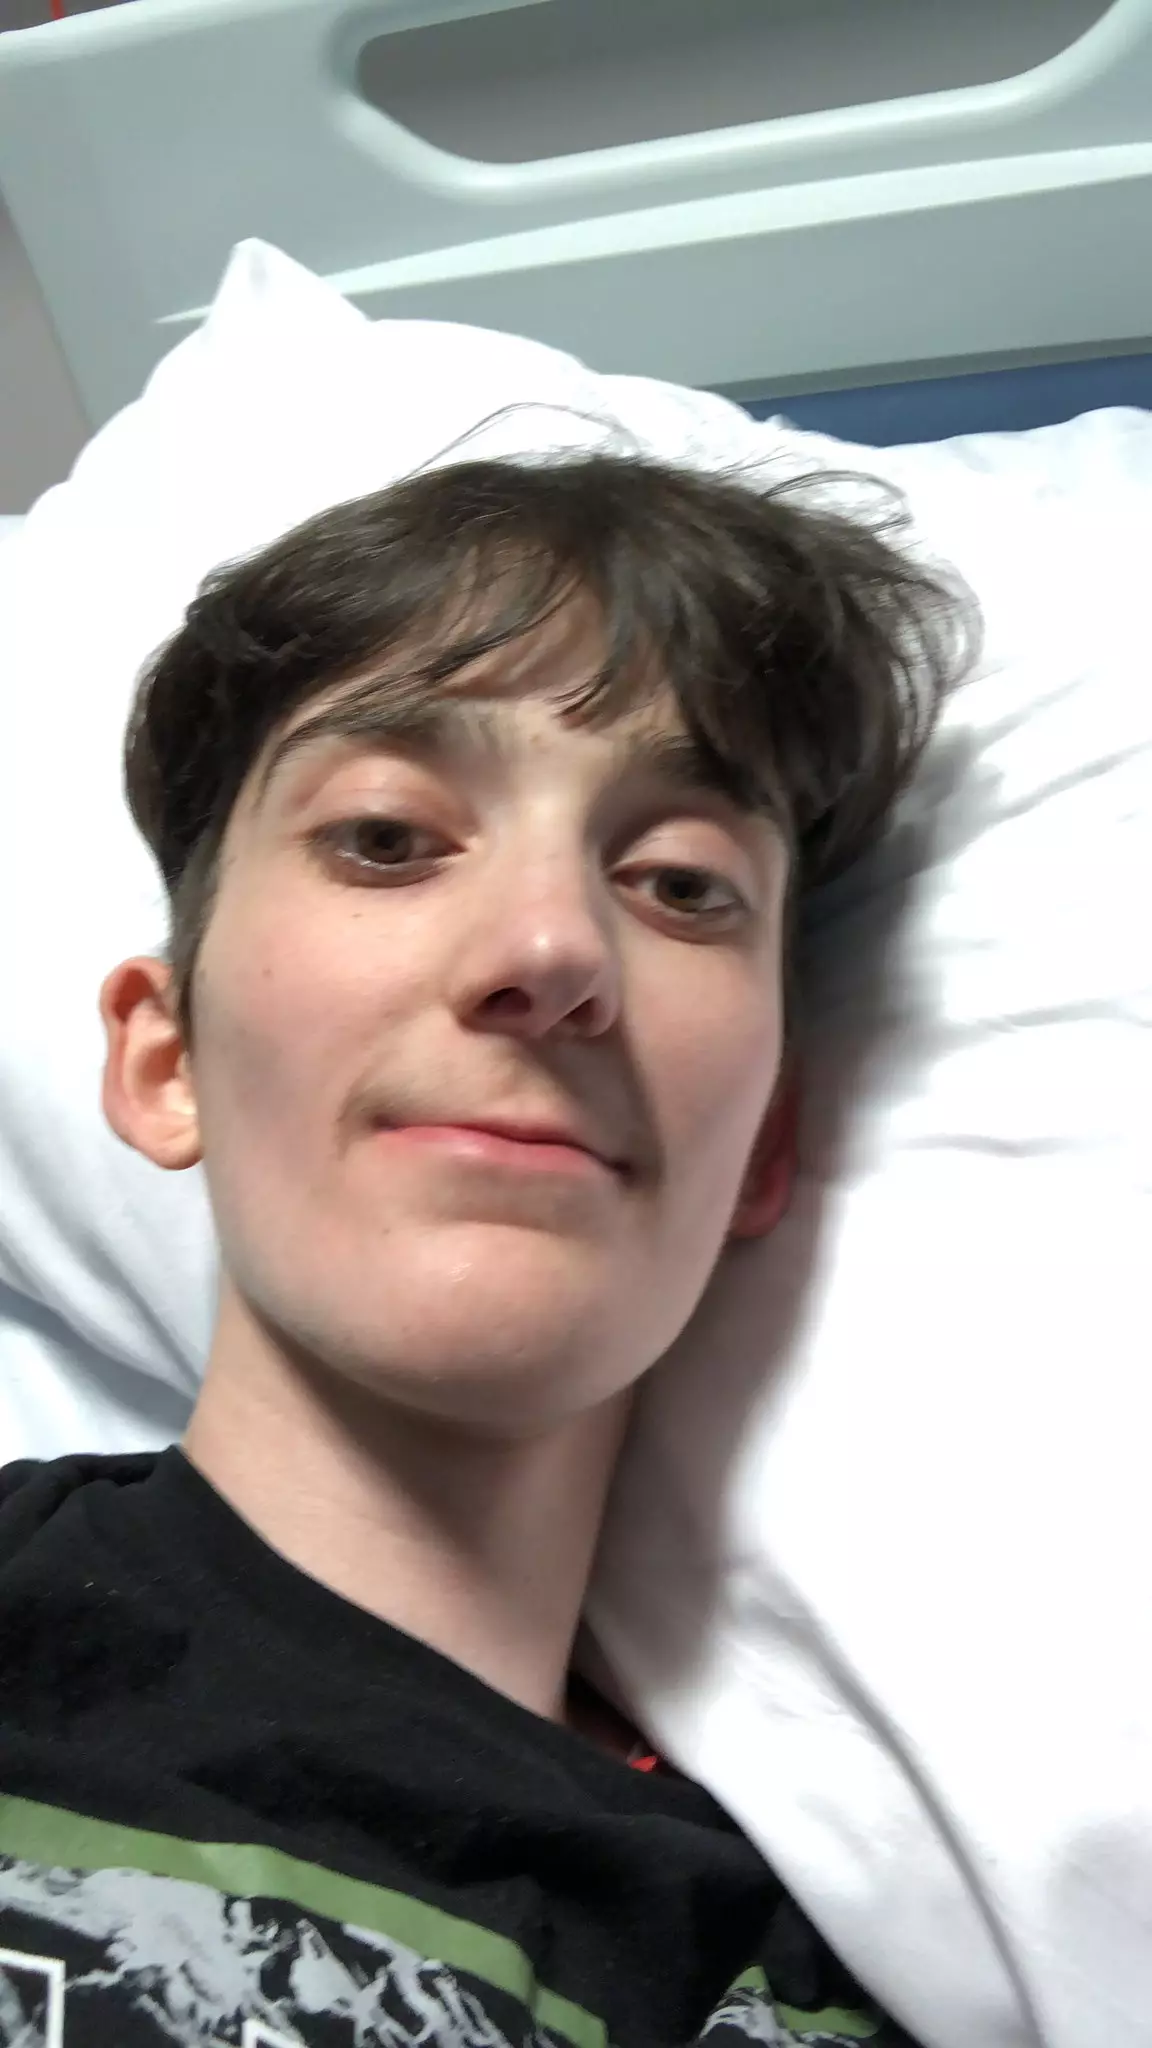 YouTuber Sir Kipsta has tragically died aged 17.